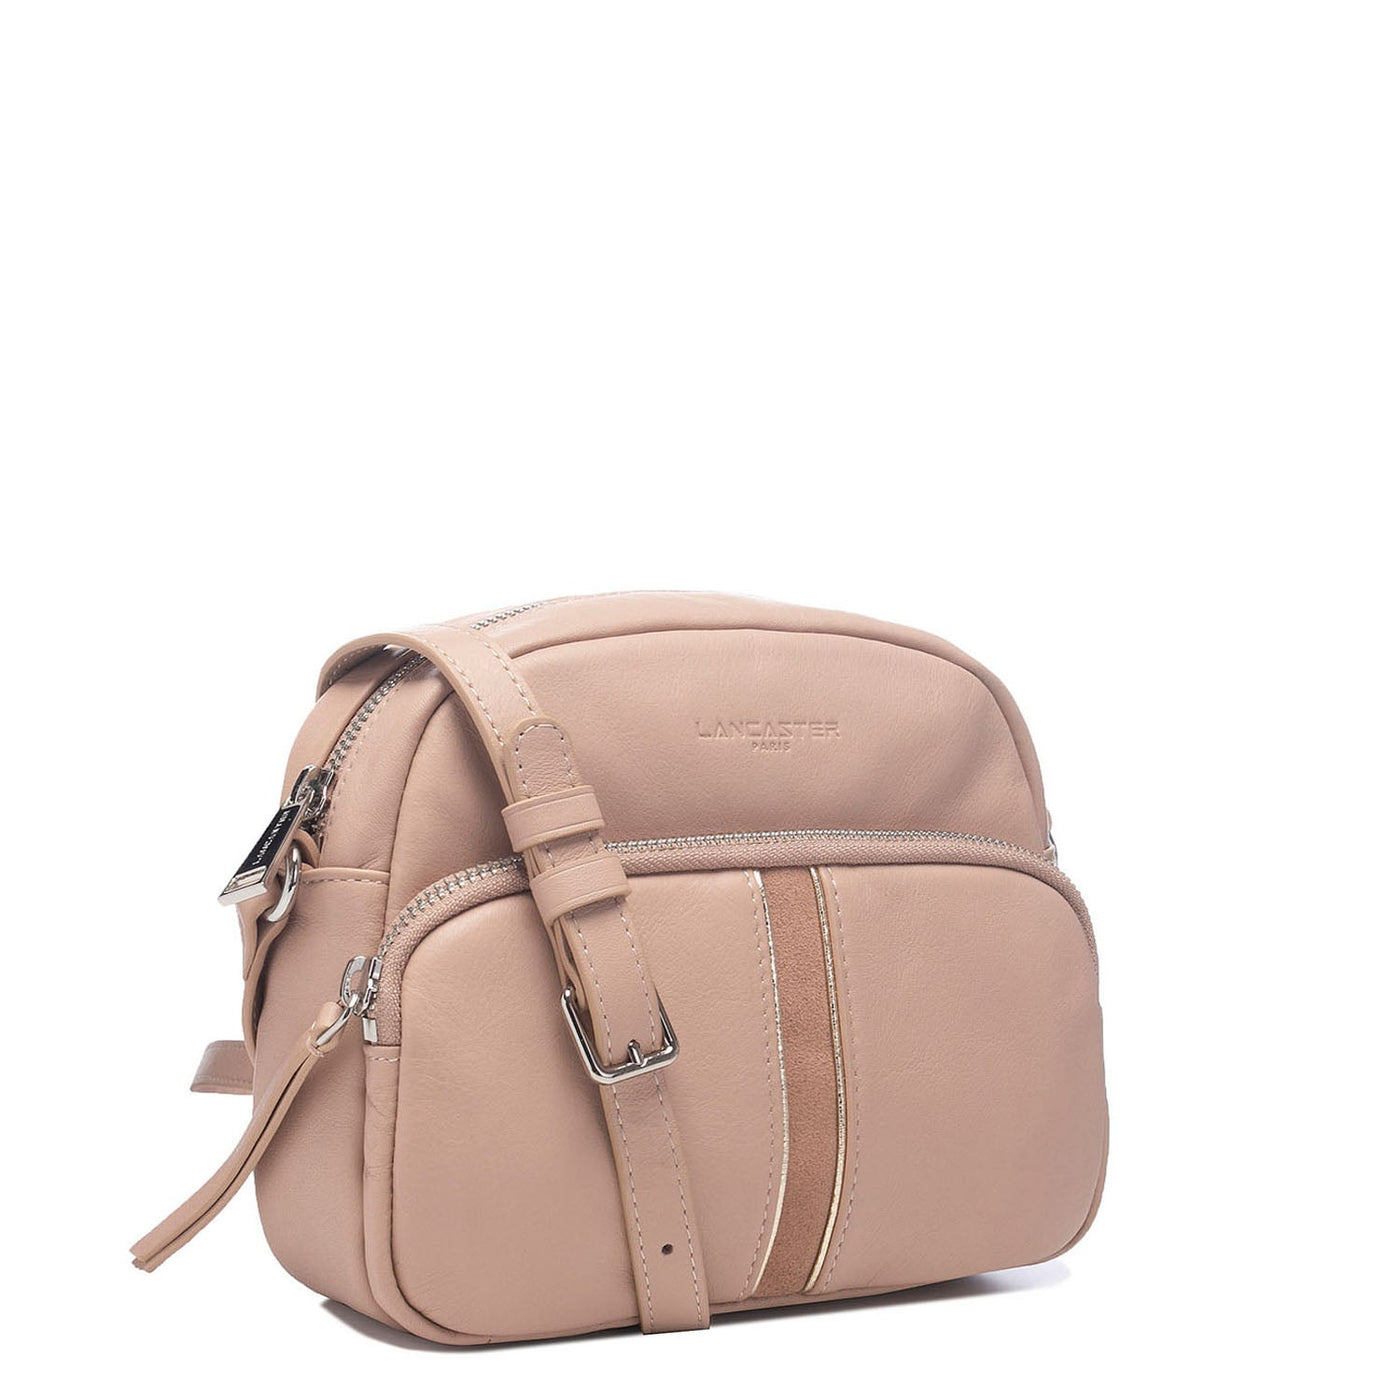 reporter bag - soft melody #couleur_cappuccino